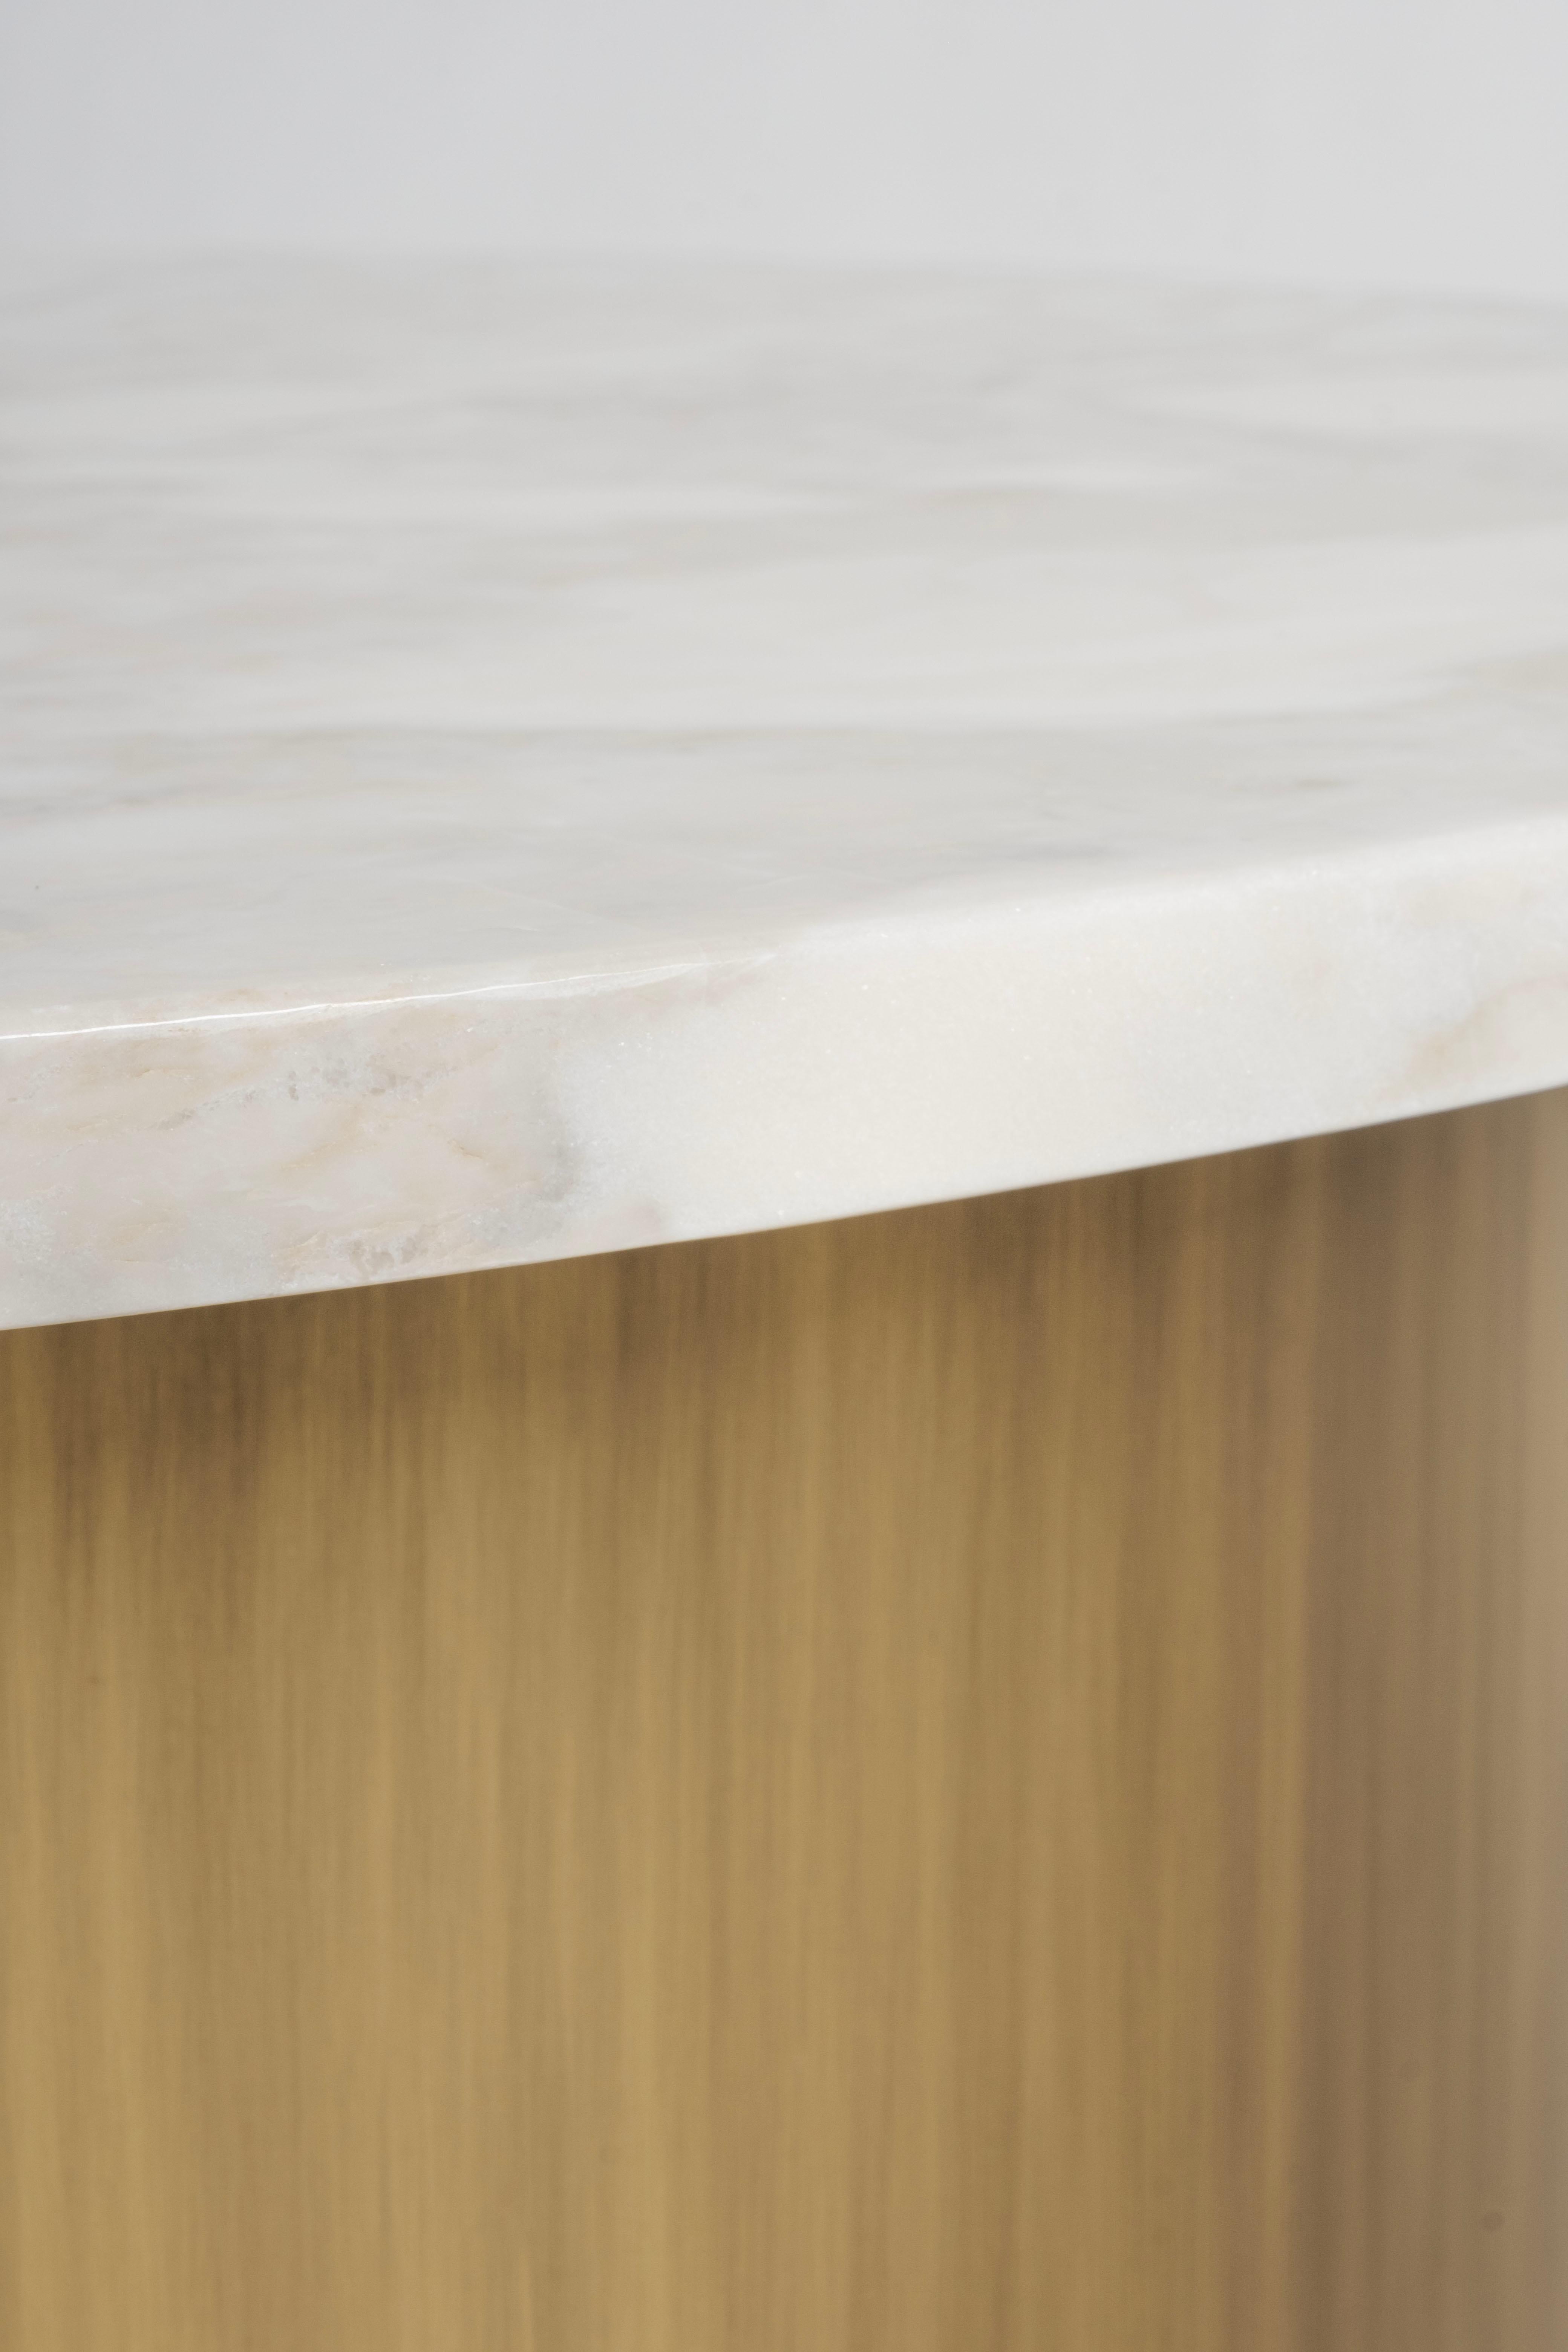 Hand-Crafted Modern Landscape Side Tables Calacatta Oro Marble Handmade Portugal Greenapple For Sale